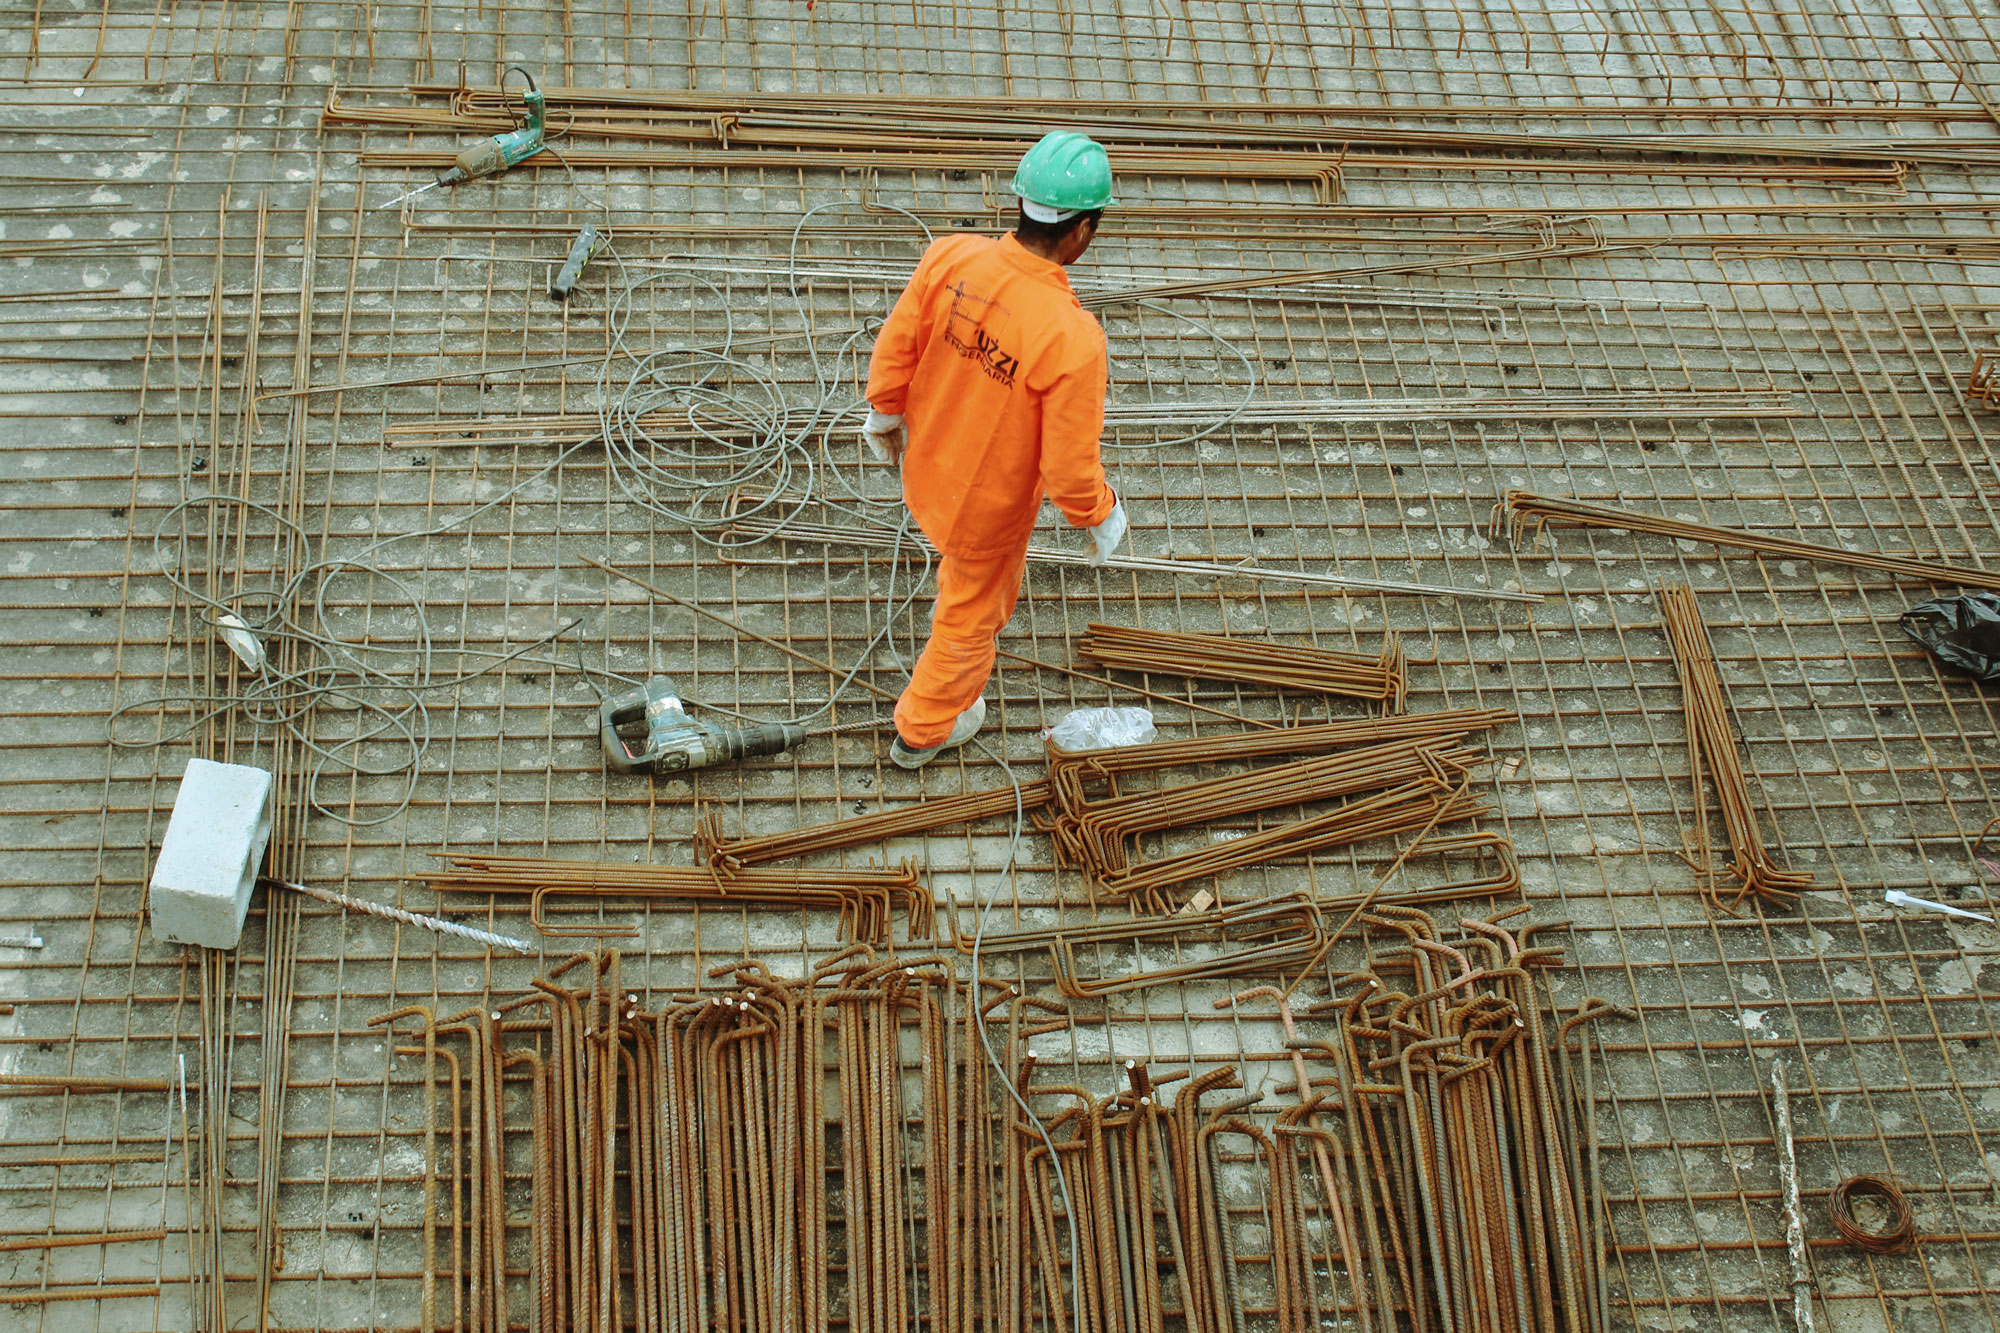 Photo of a person on construction site, wearing high visibility clothing and a hard hat